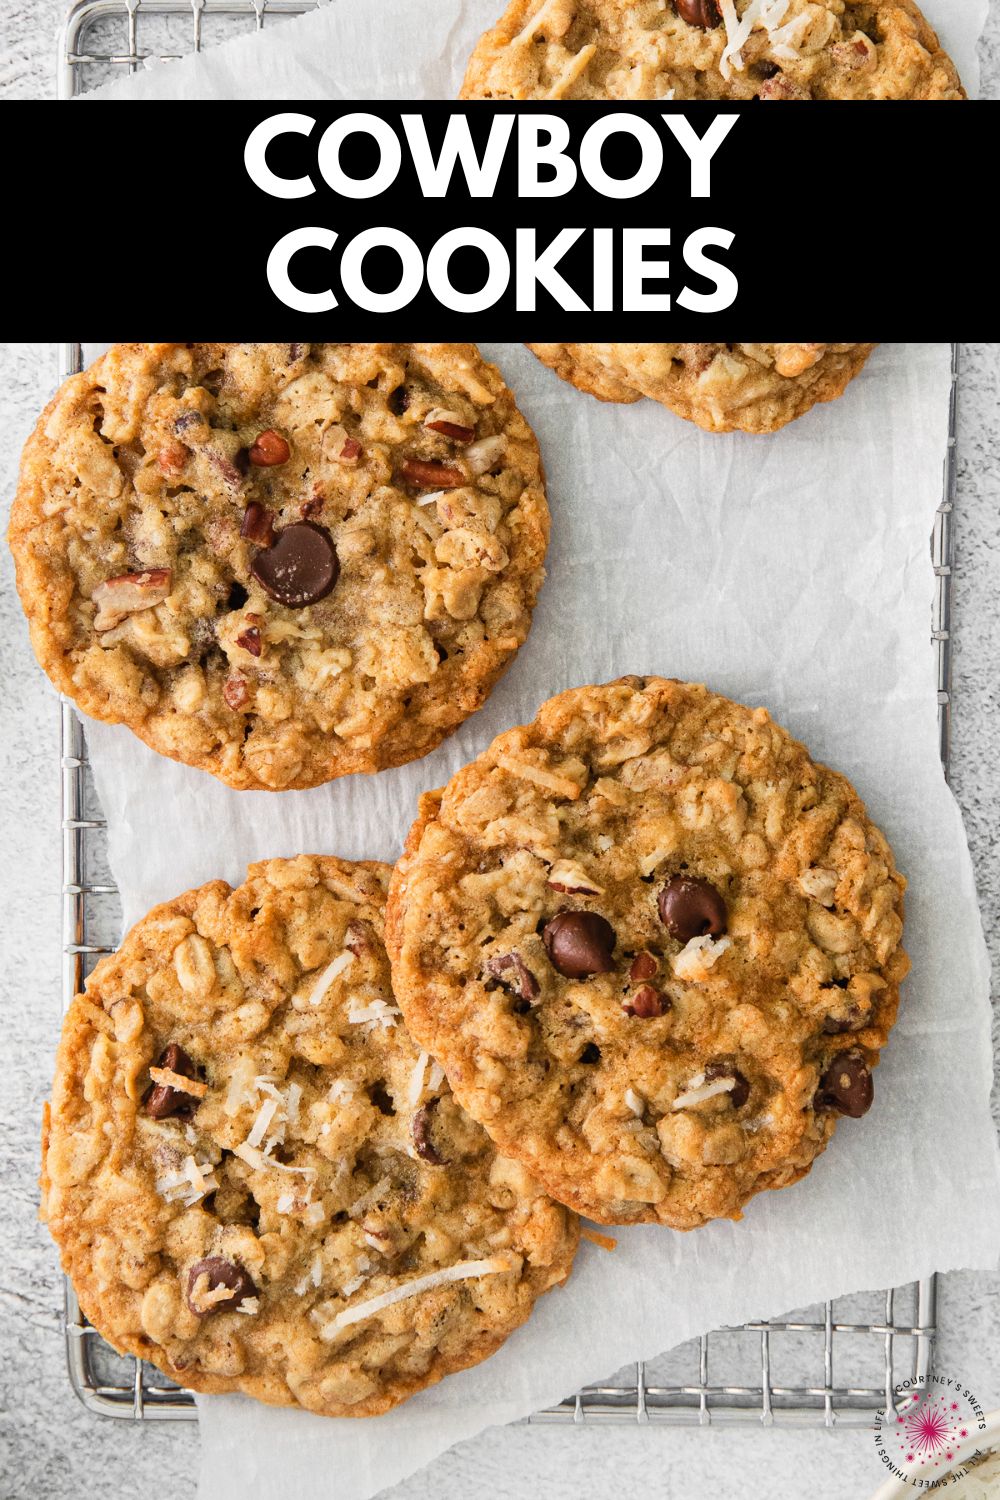 cowboy cookies with text on image saying the name of them for pinterest.